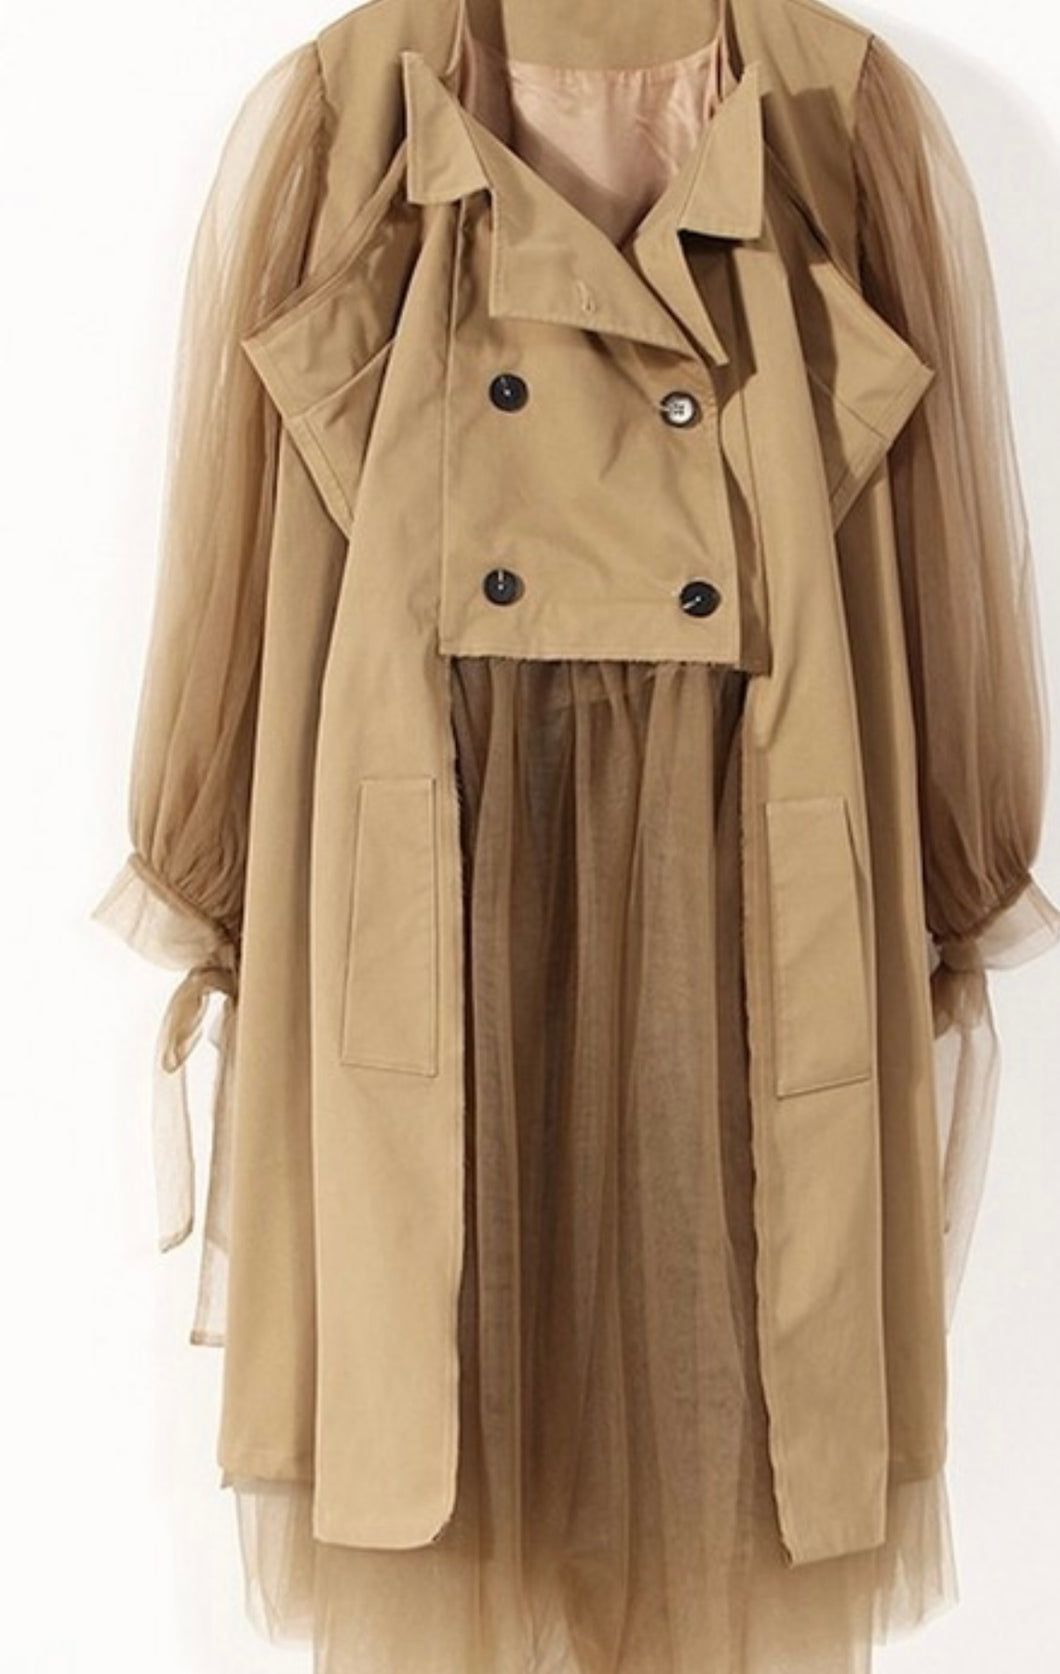 Tulle Trench Coat